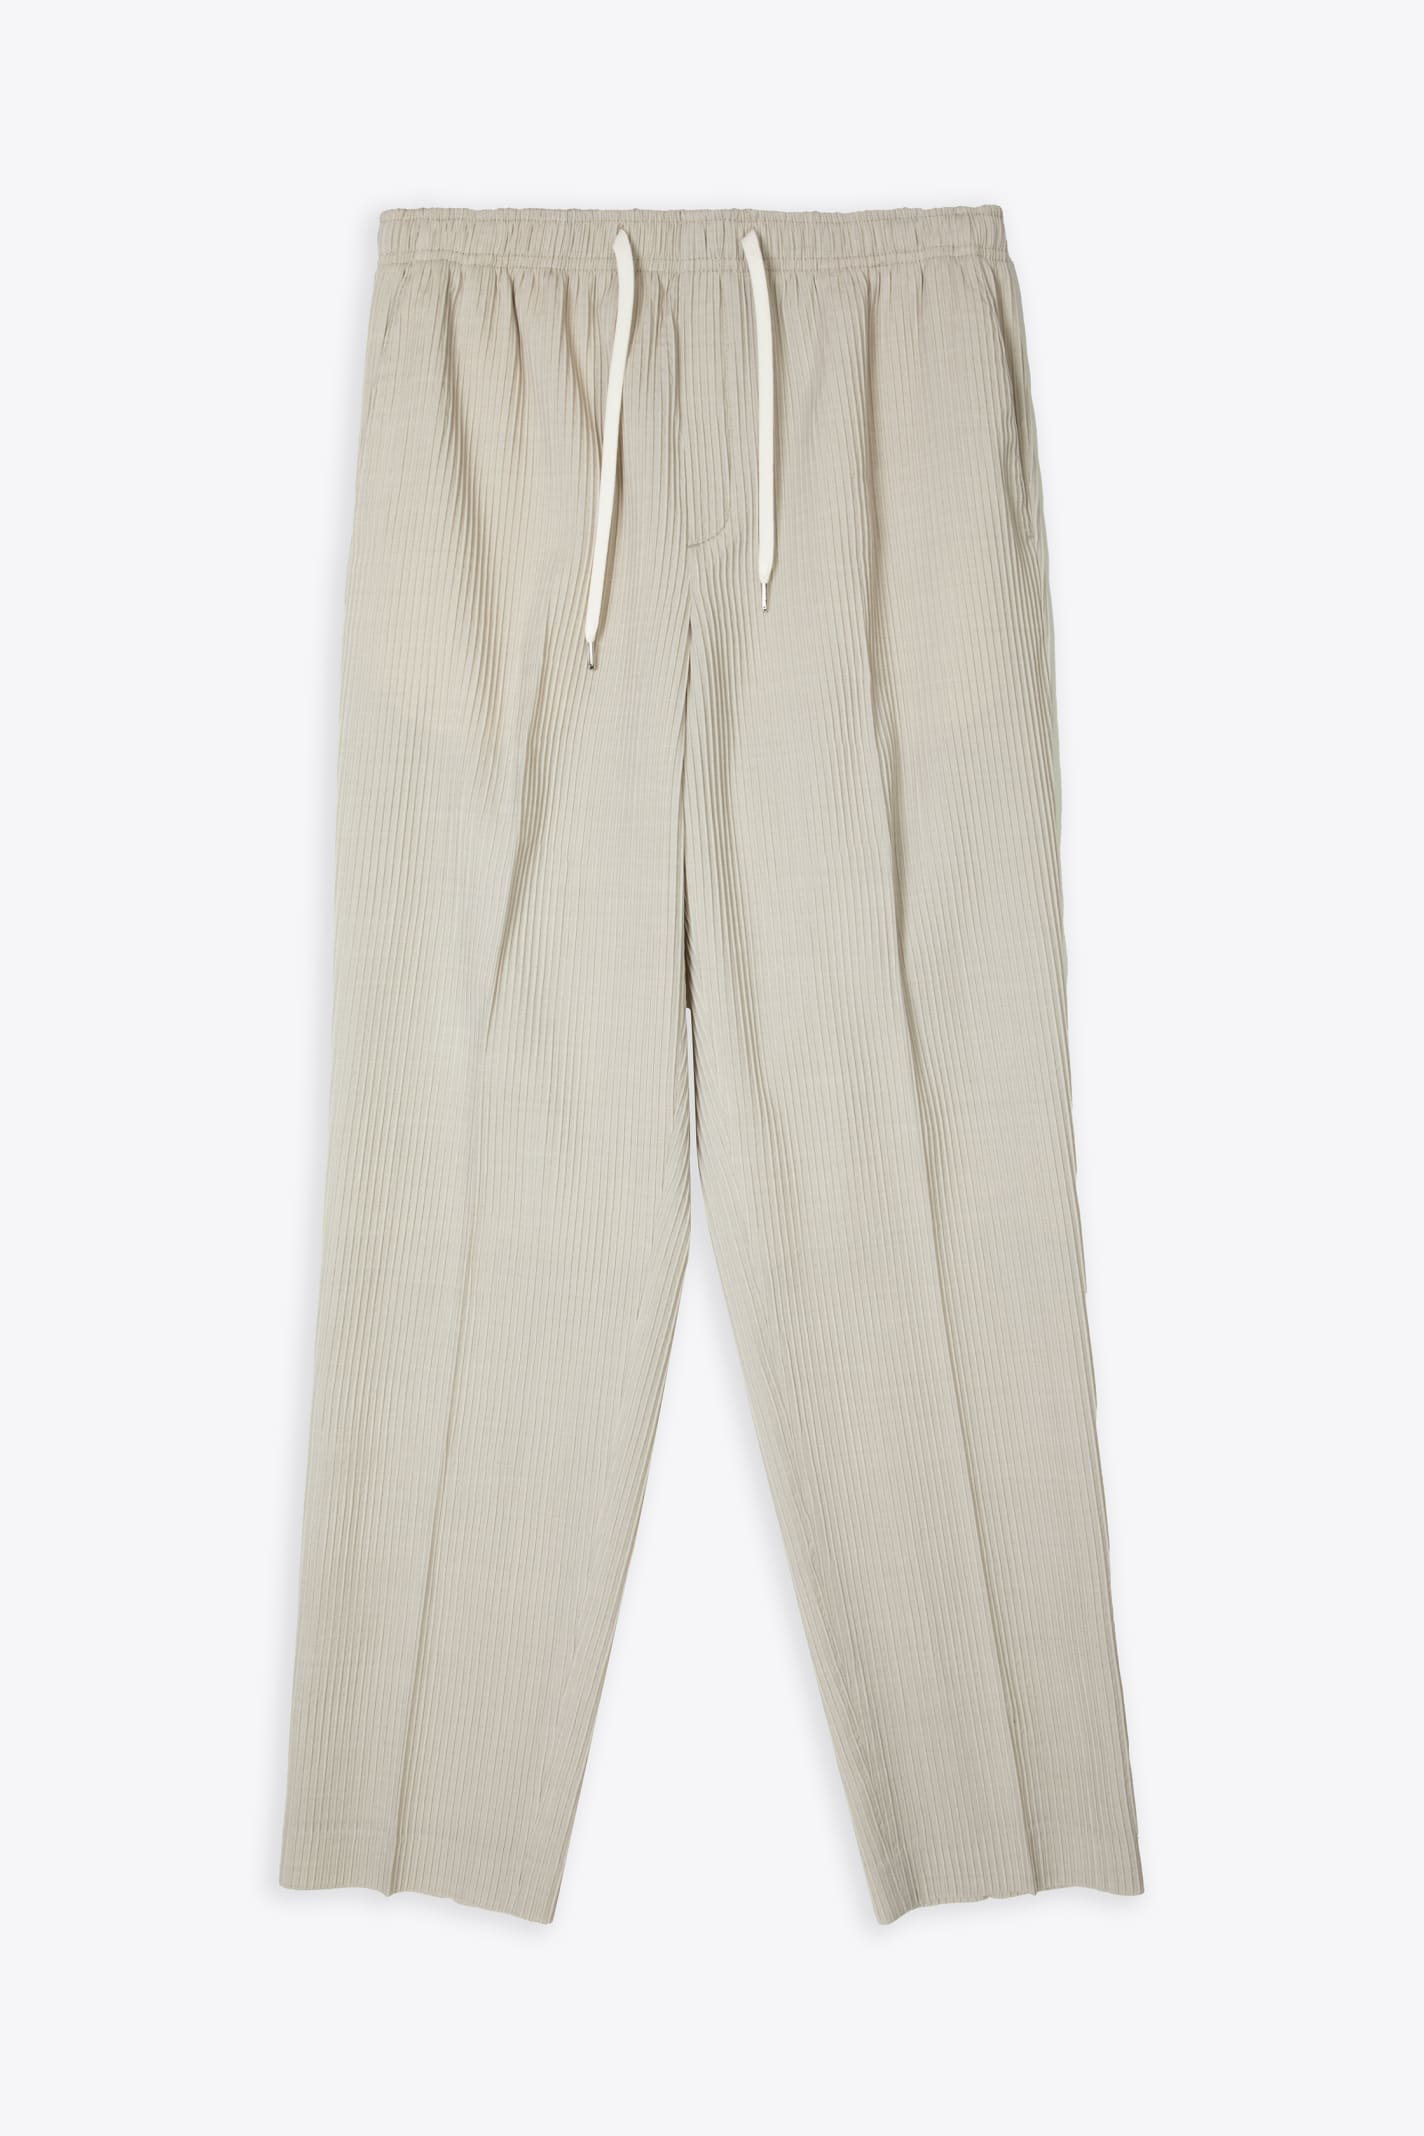 Cellar Door Alfred Coulisse Beige wool weave tapered pant - Alfred coulisse